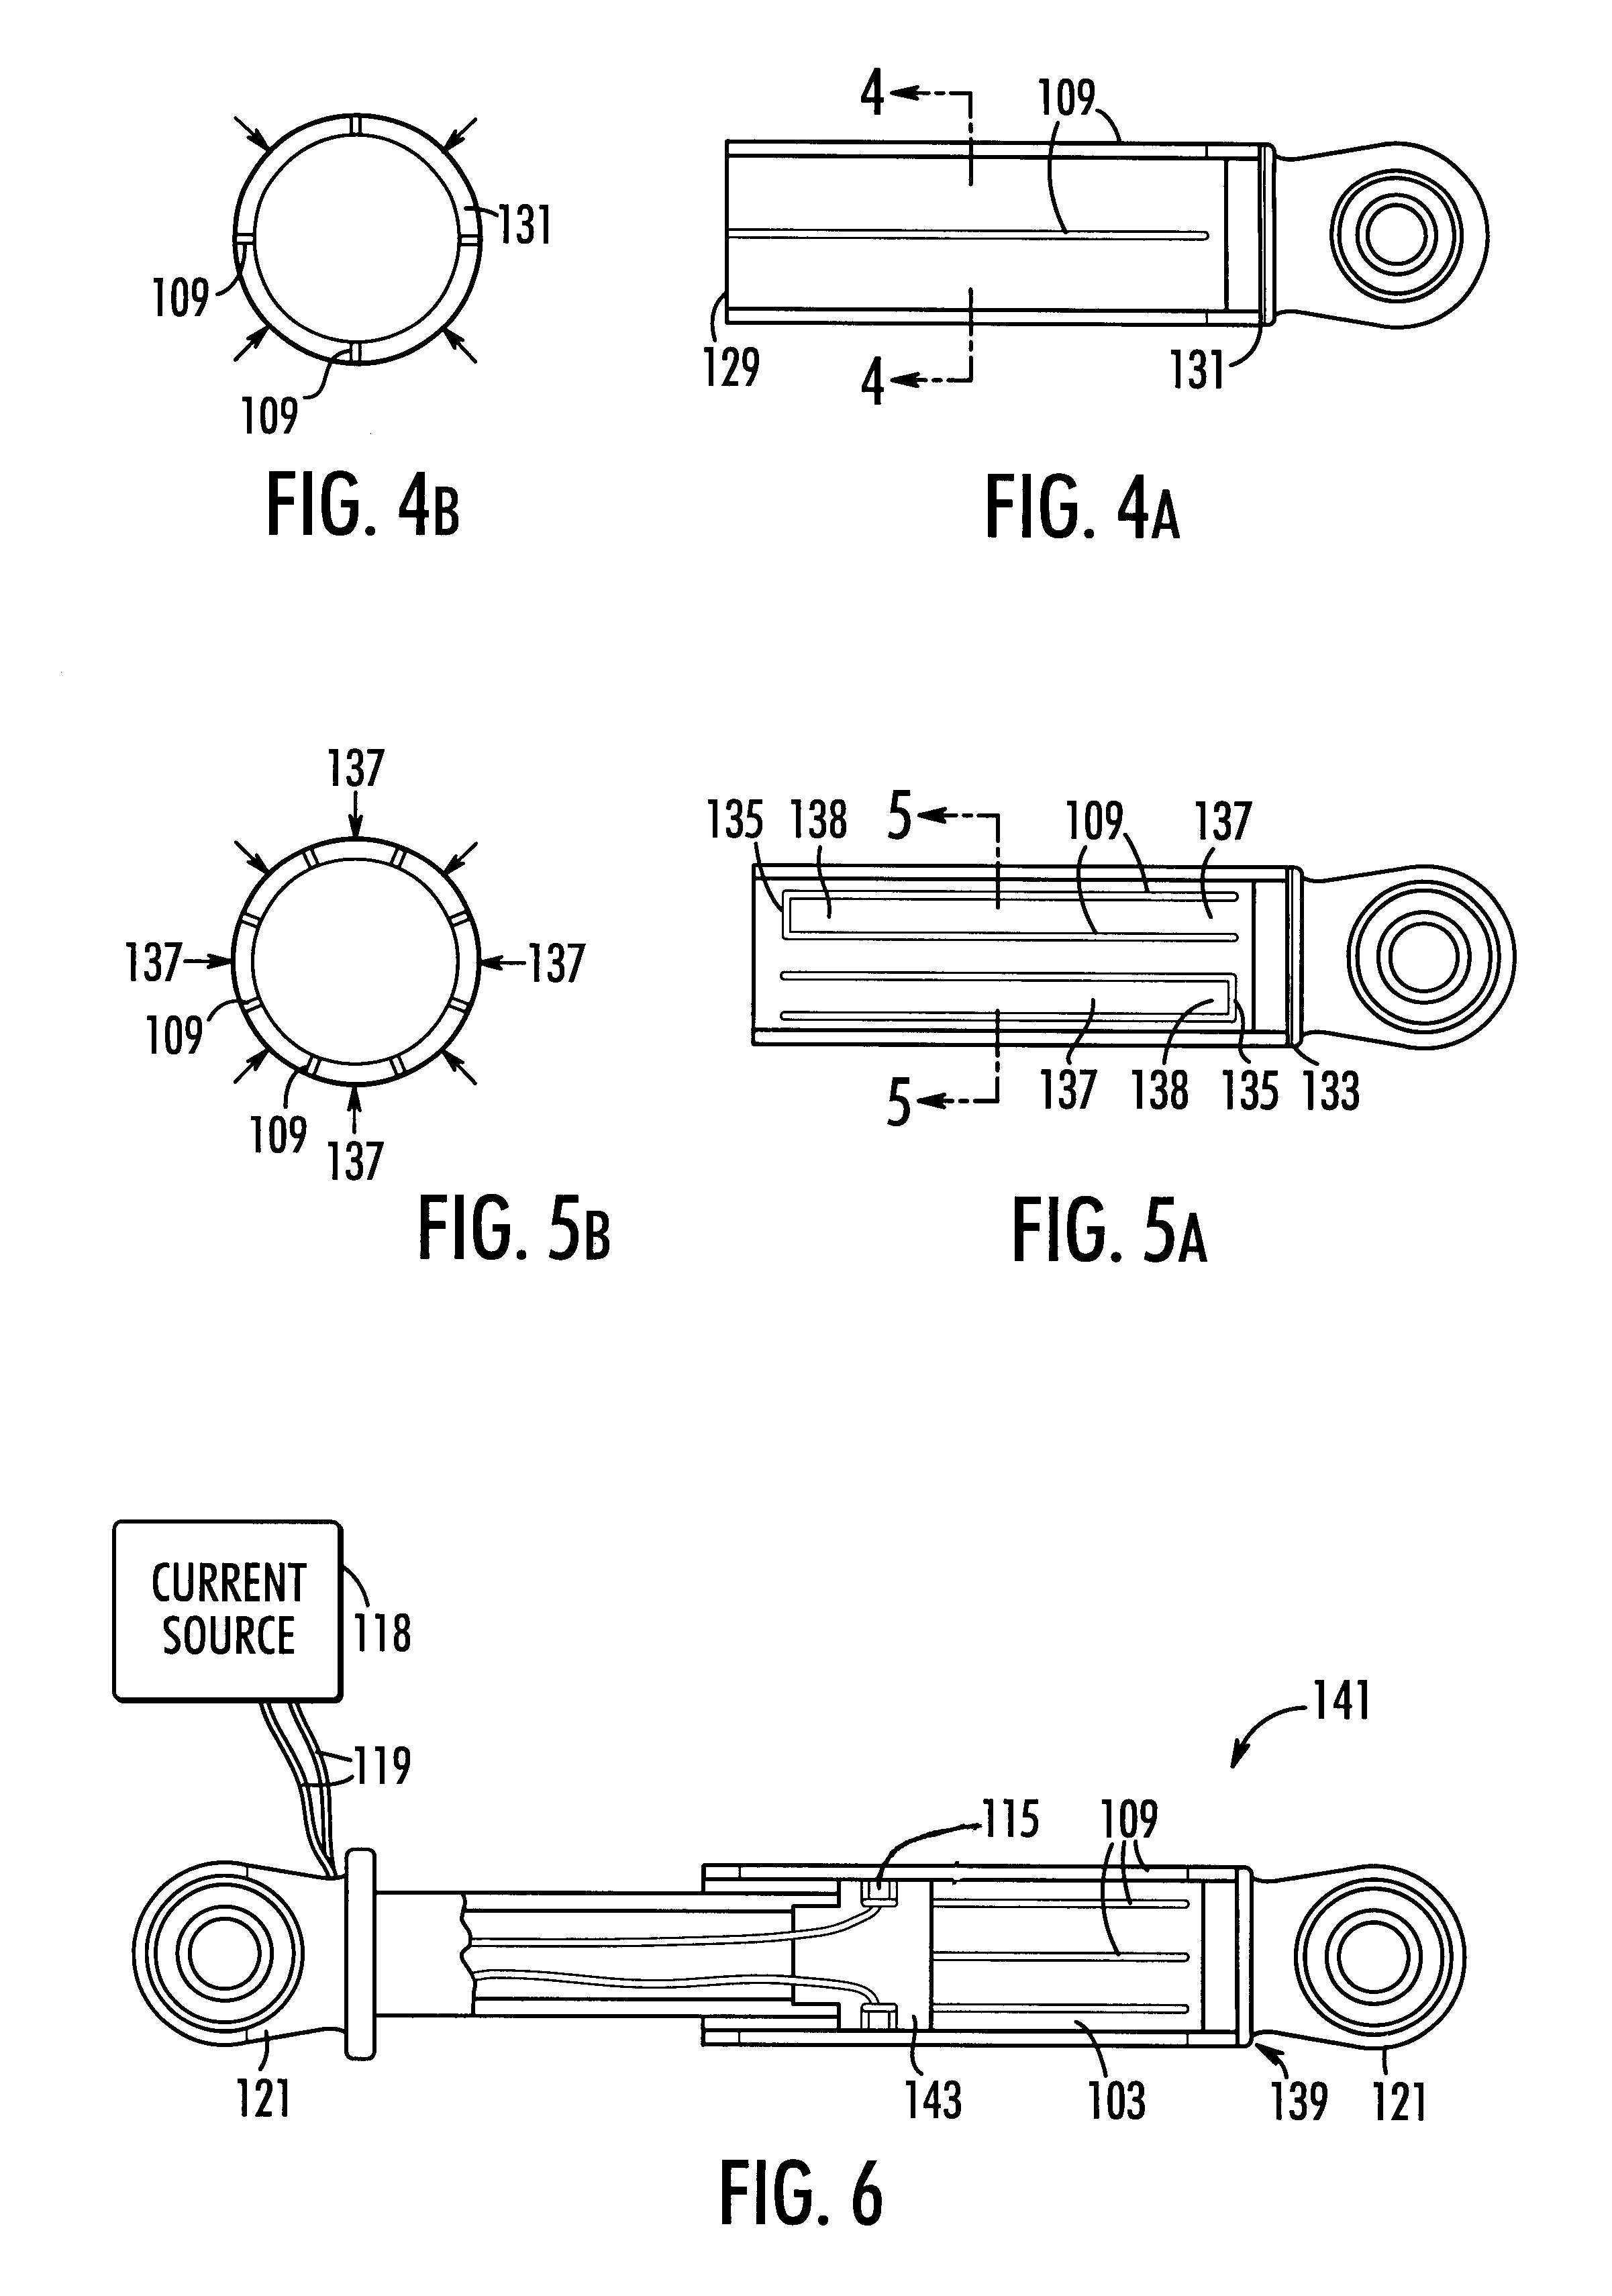 Magnetically actuated motion control device